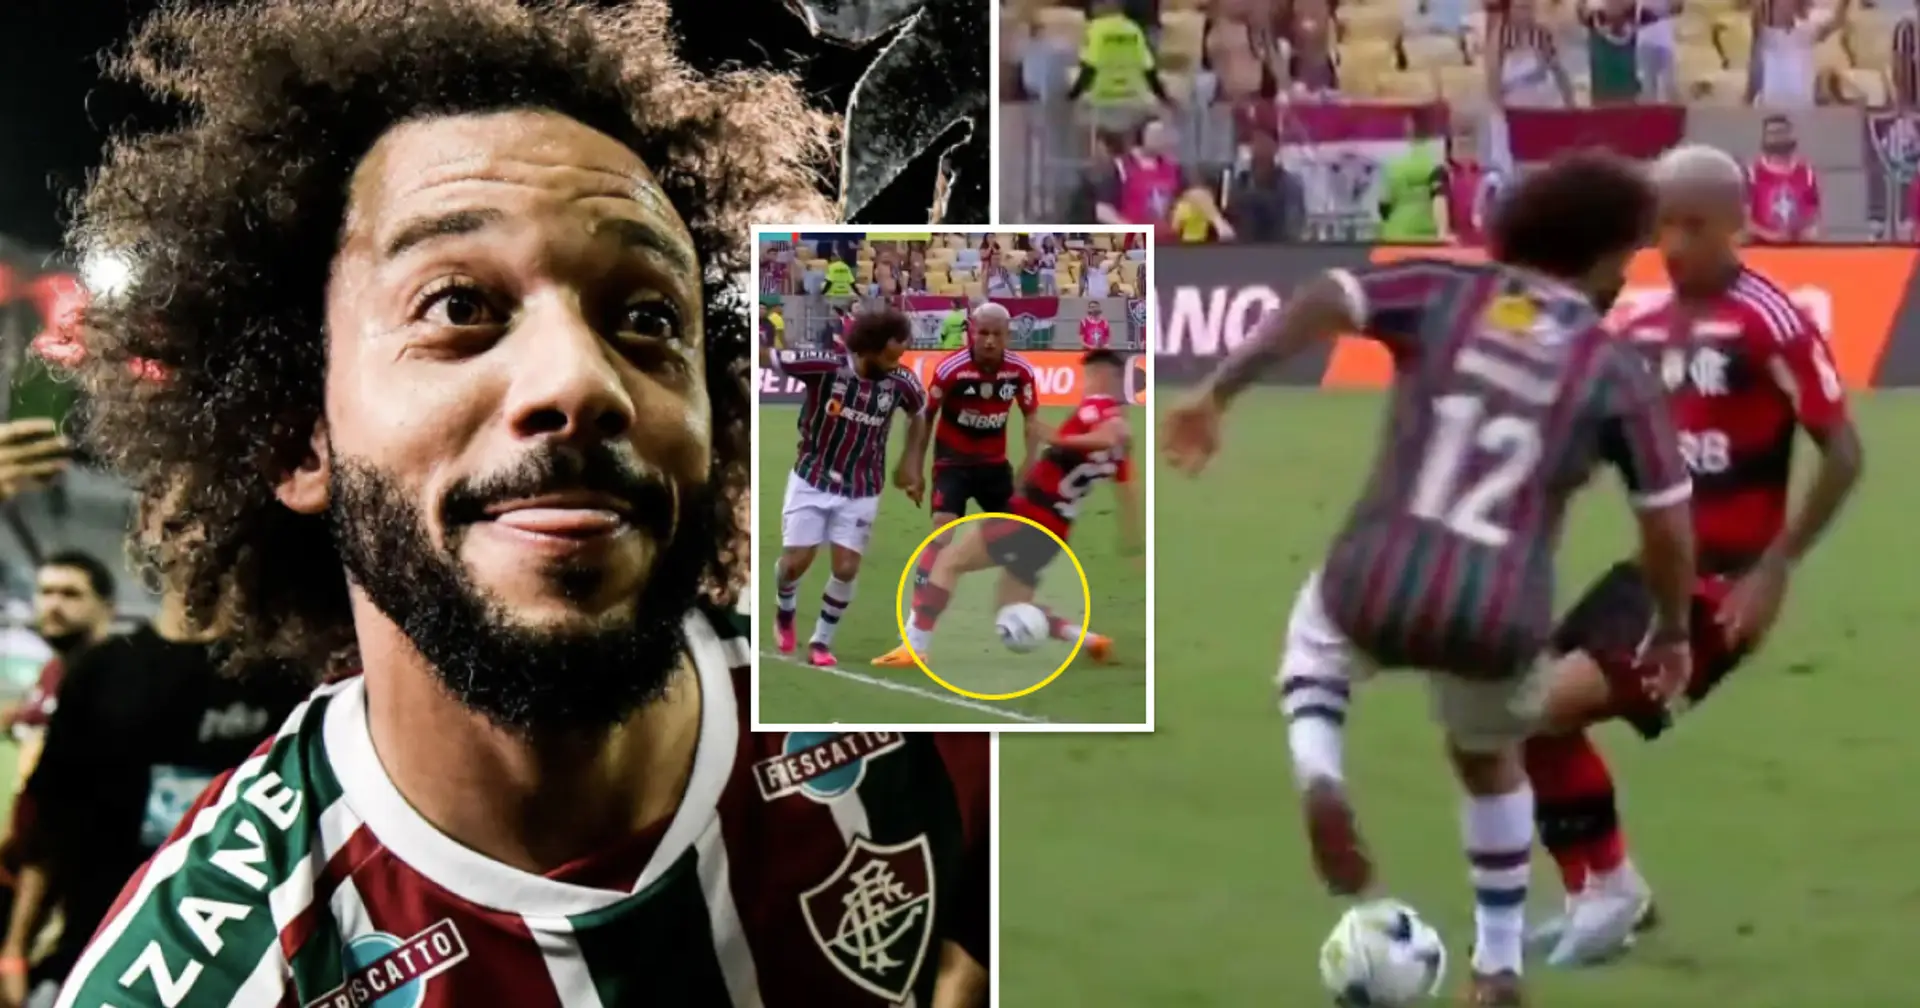 Still got it: Marcelo all smiles as he shows off skills in Brazilian derby, nutmegs his opponent